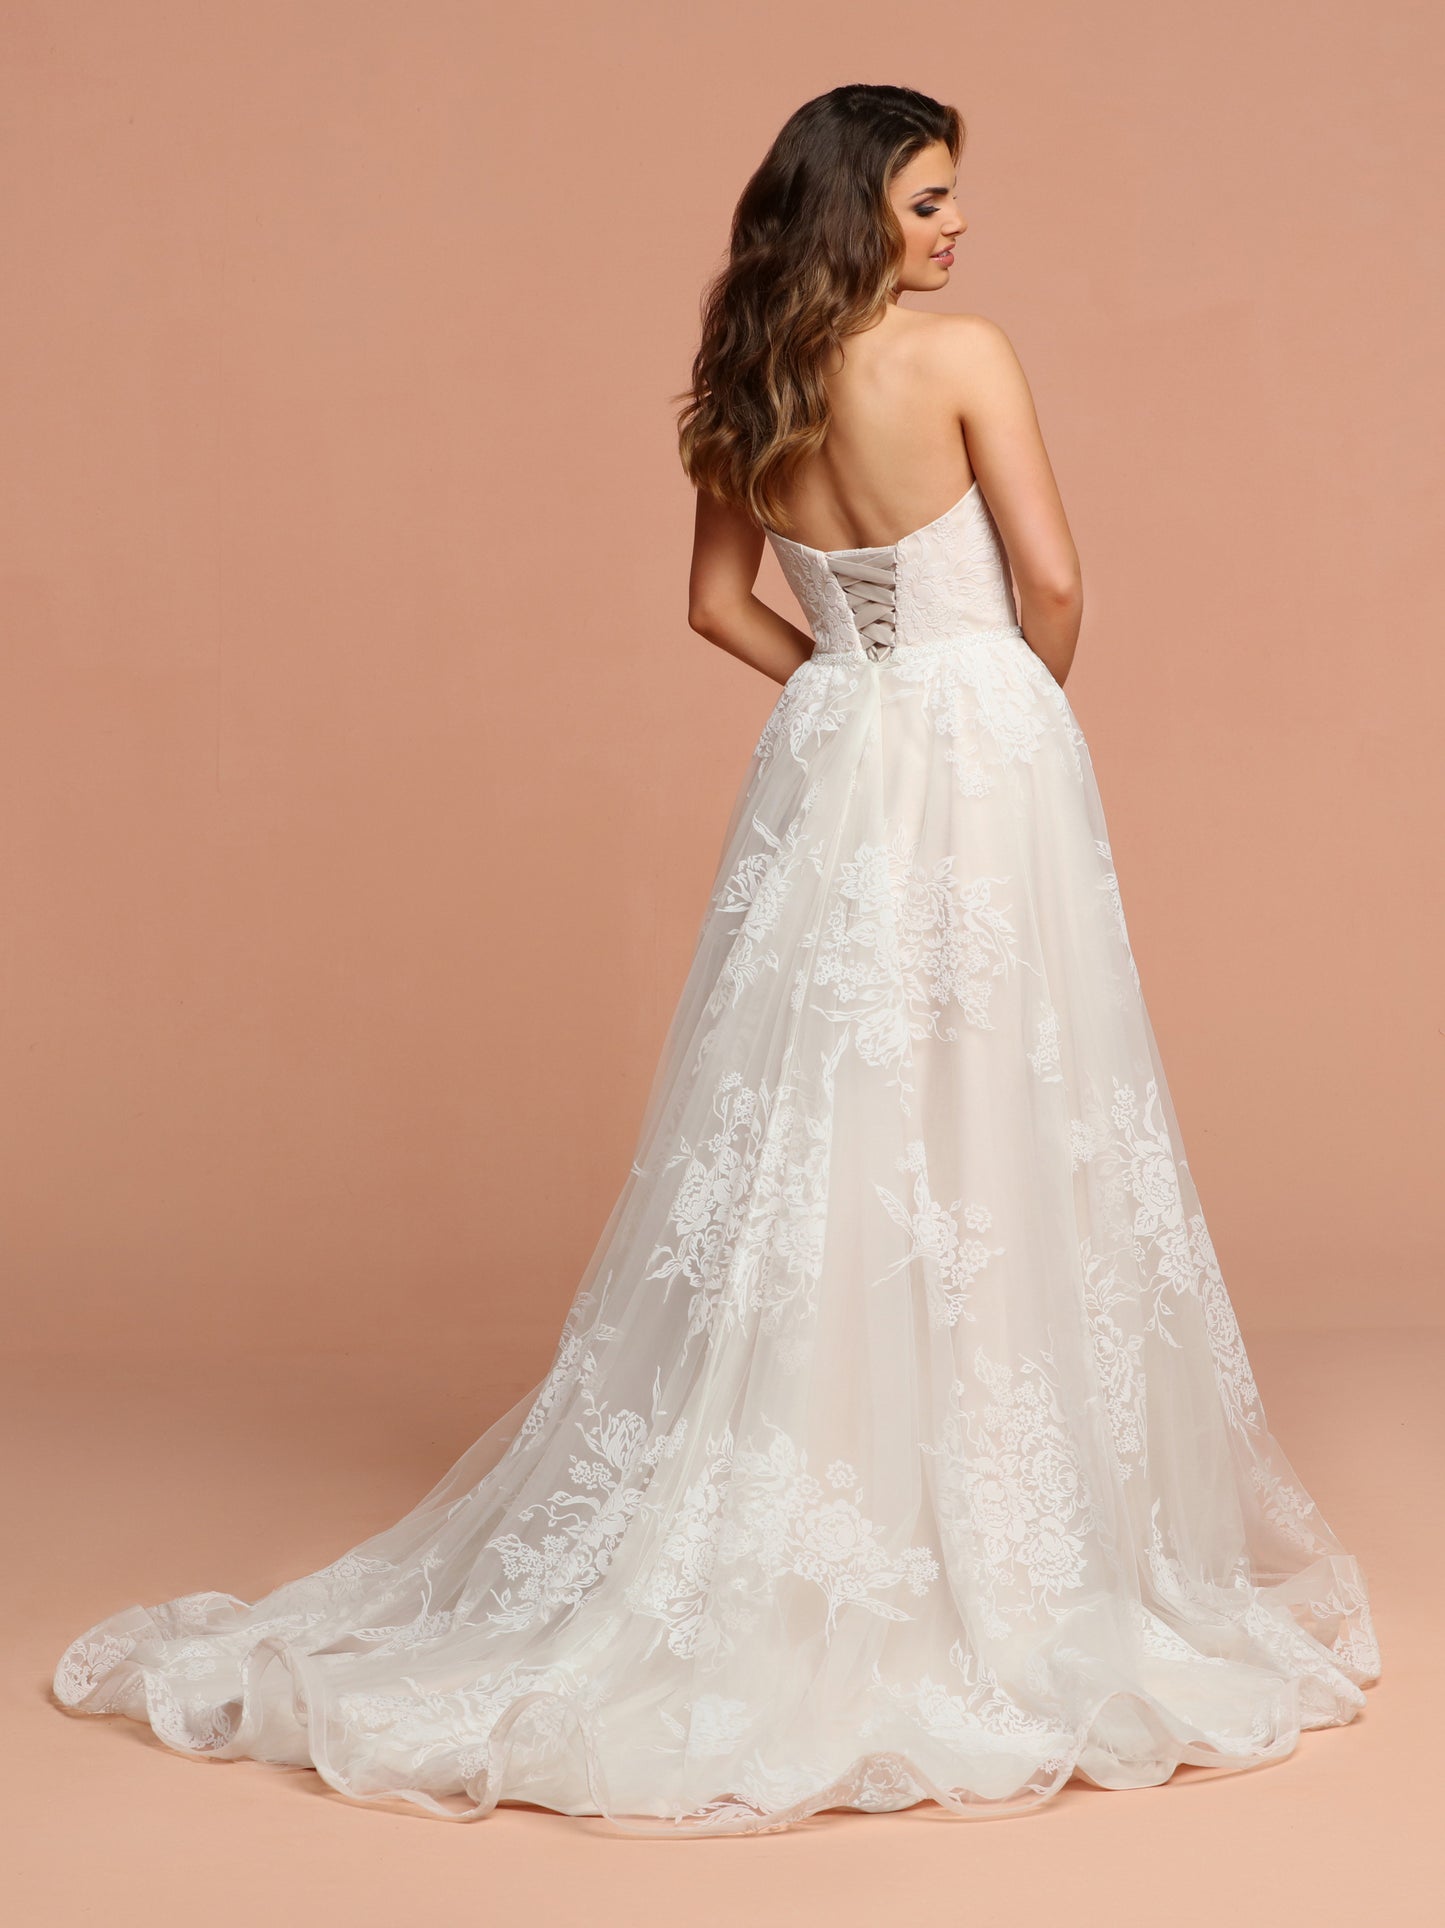 Davinci Bridal 50599 This flowing tulle gown has soft velvet like flowers throughout.  The sweetheart strapless bodice has a beaded belt at the waist extending into a lace up back. Available for 1-2 Week Delivery!!!  Available Sizes: 2,4,6,8,10,12,14,16,18,20  Available Colors: Ivory/Blush, Ivory/Ivory